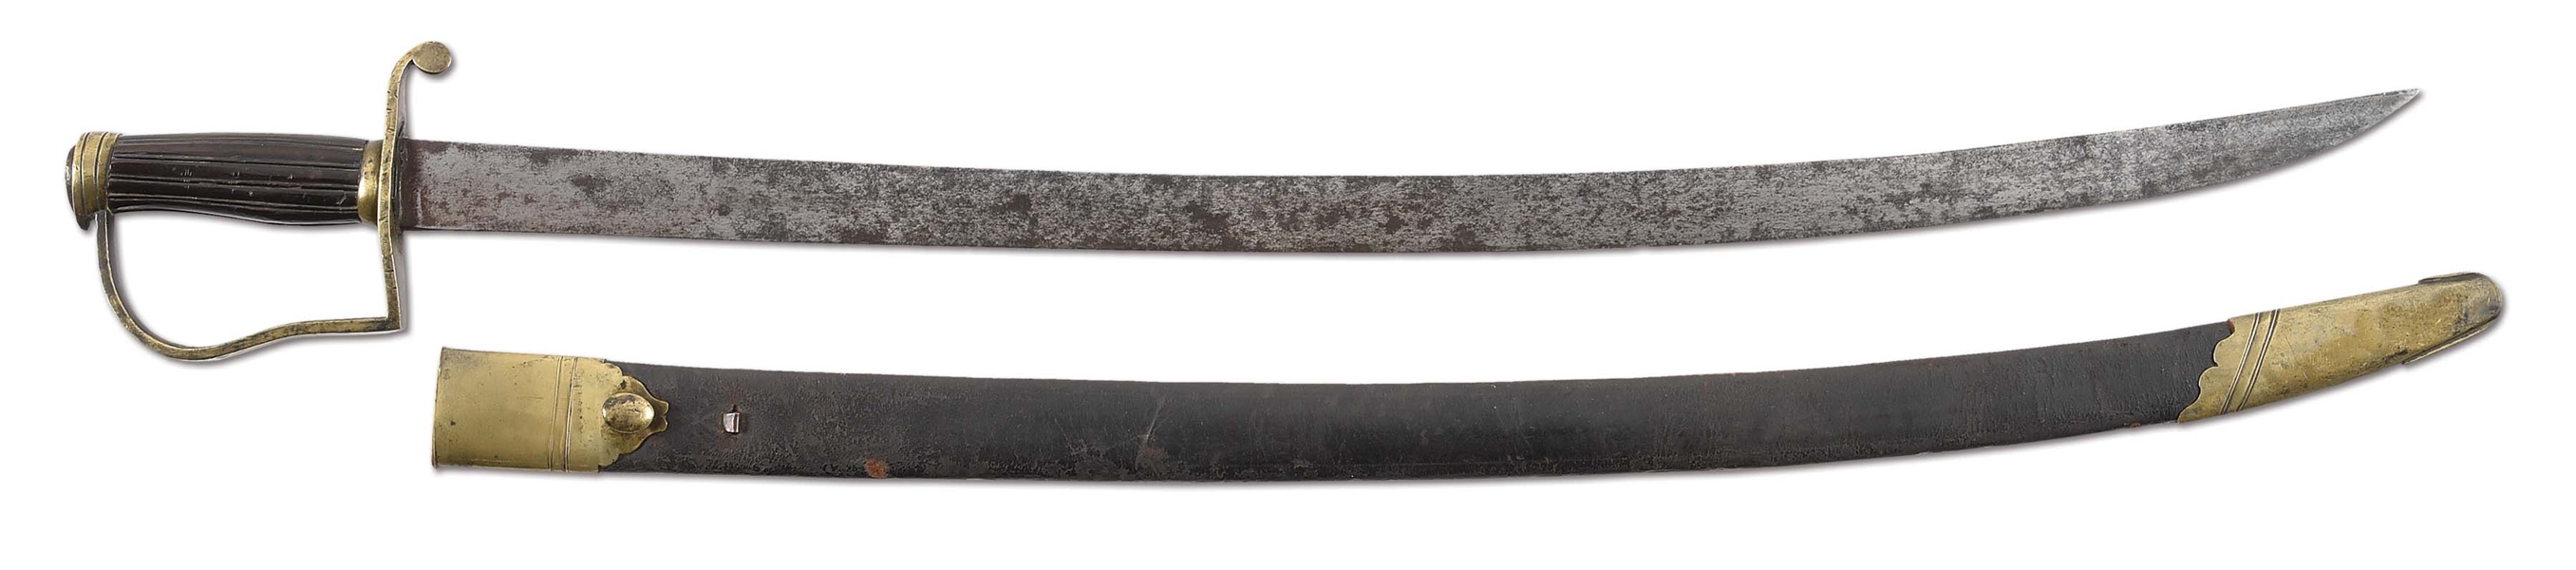 AMERICAN REVERSE-P HILTED NCO SWORD WITH SCABBARD.